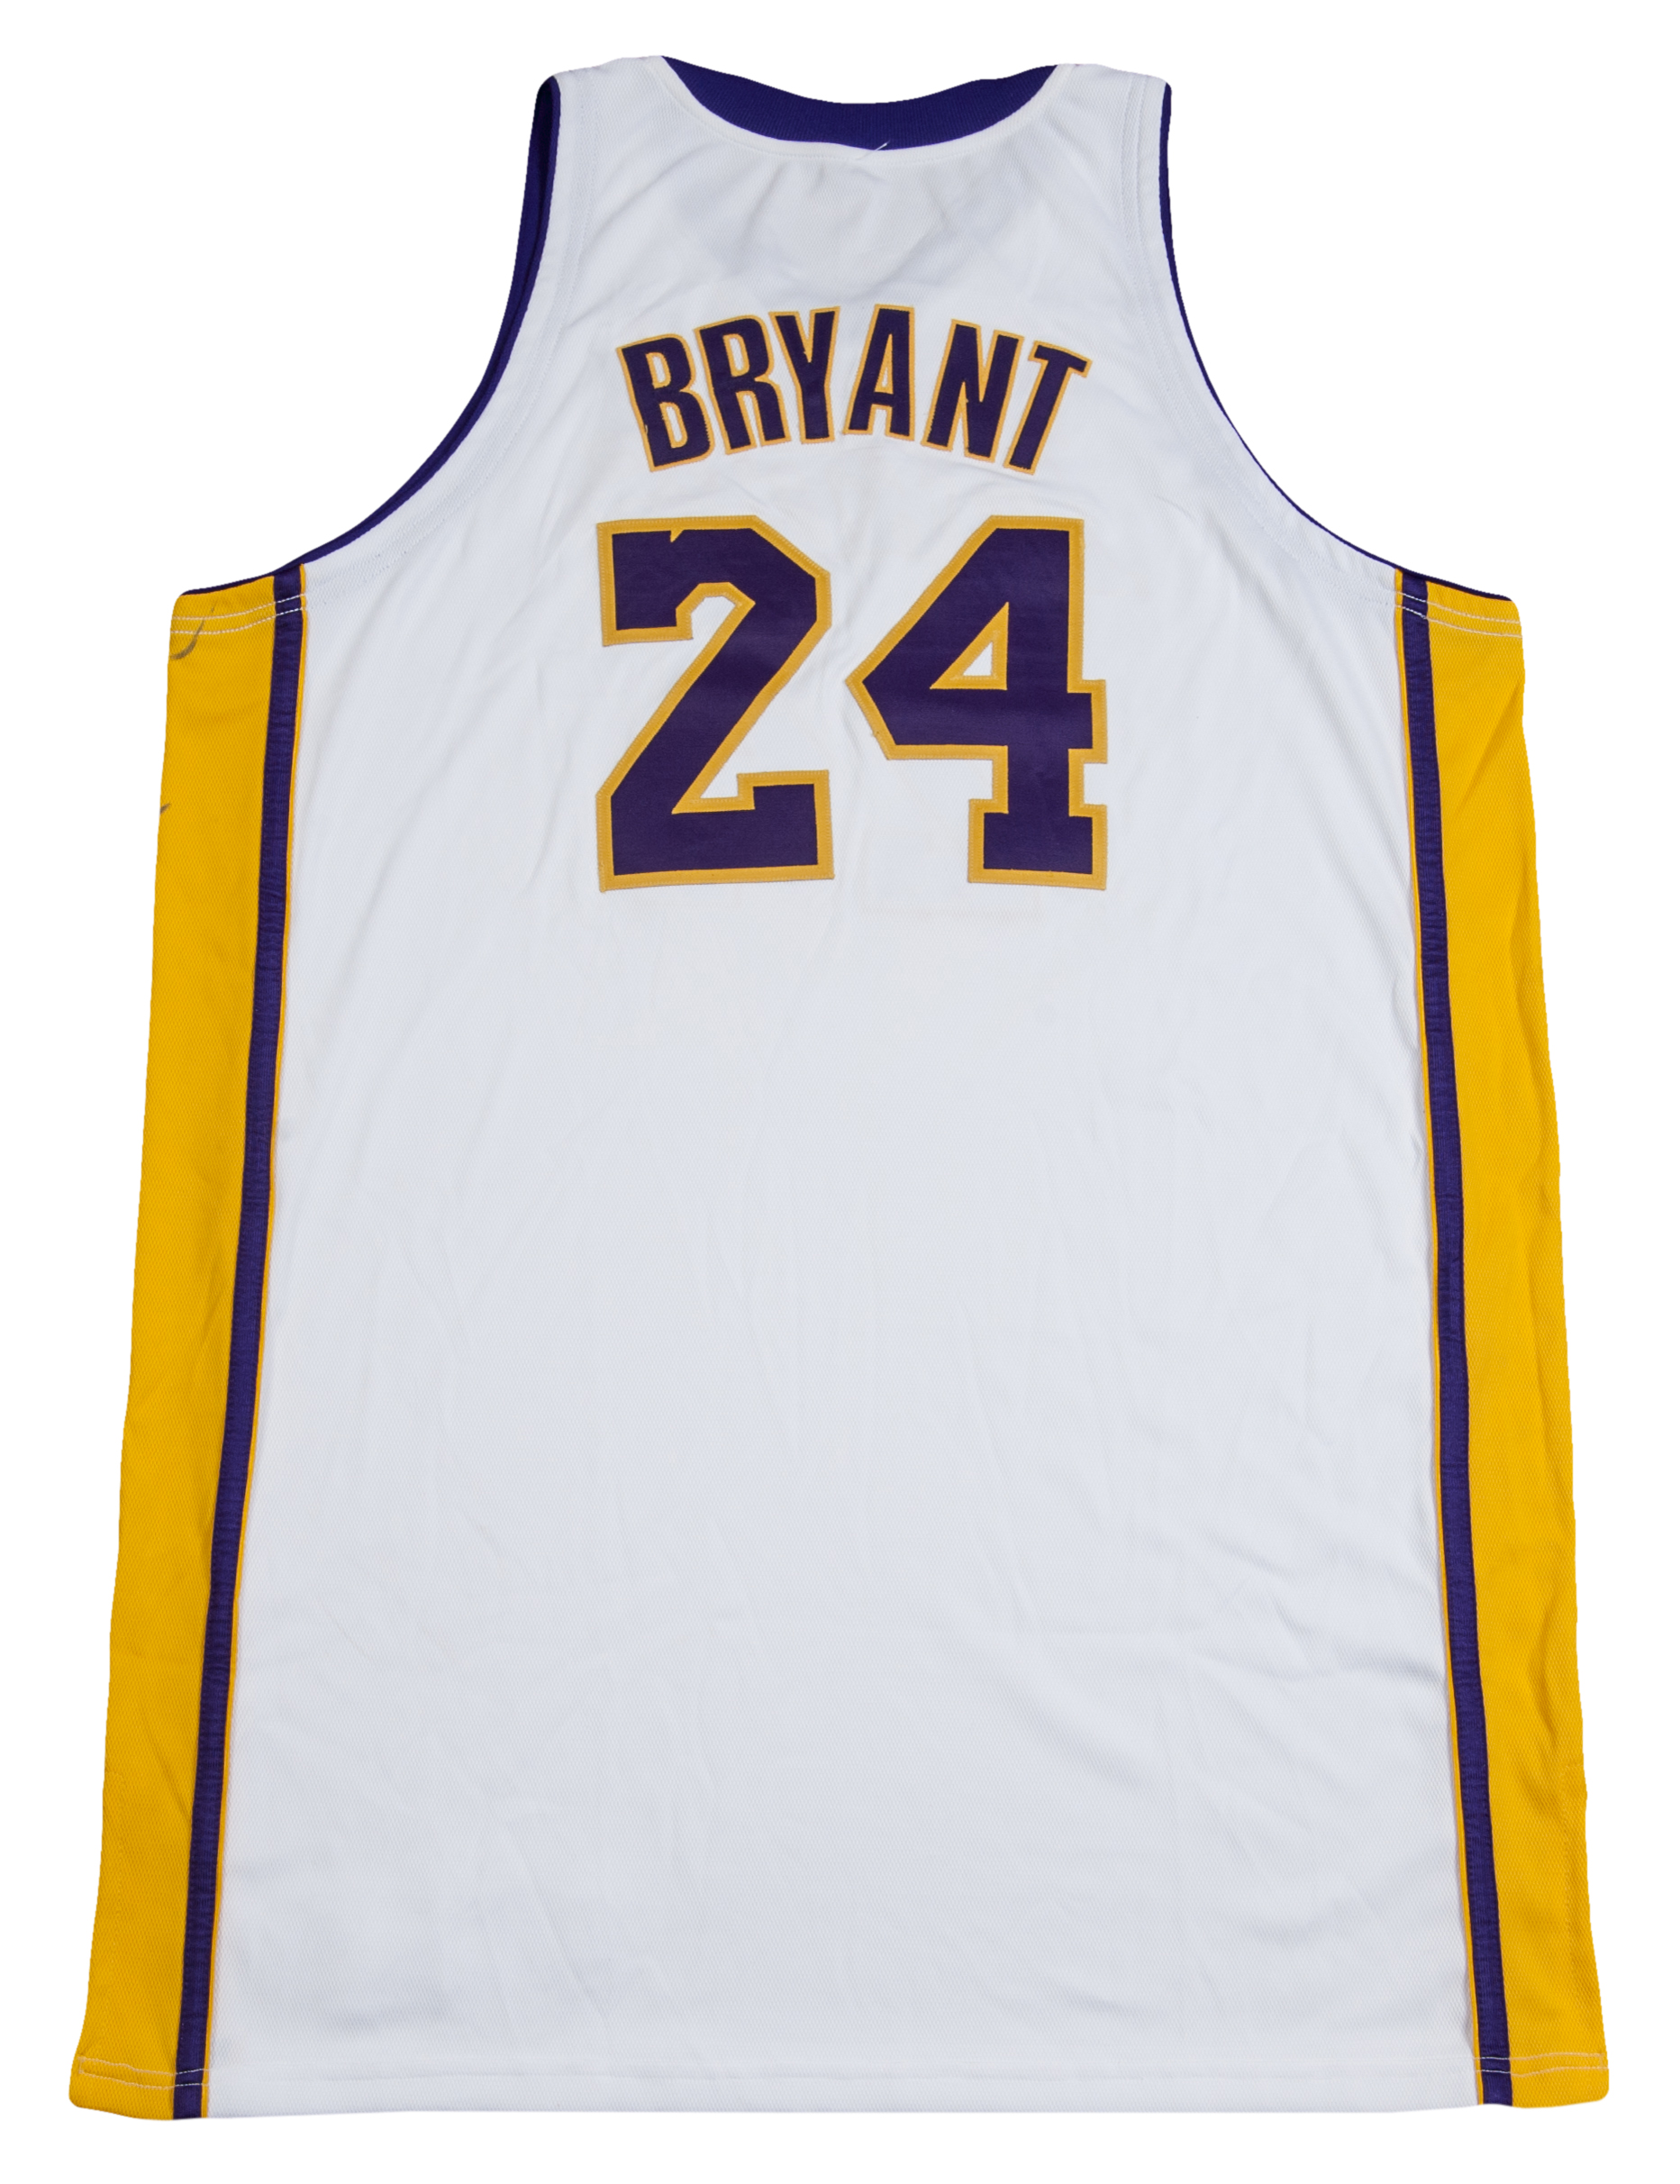 2010 lakers jersey